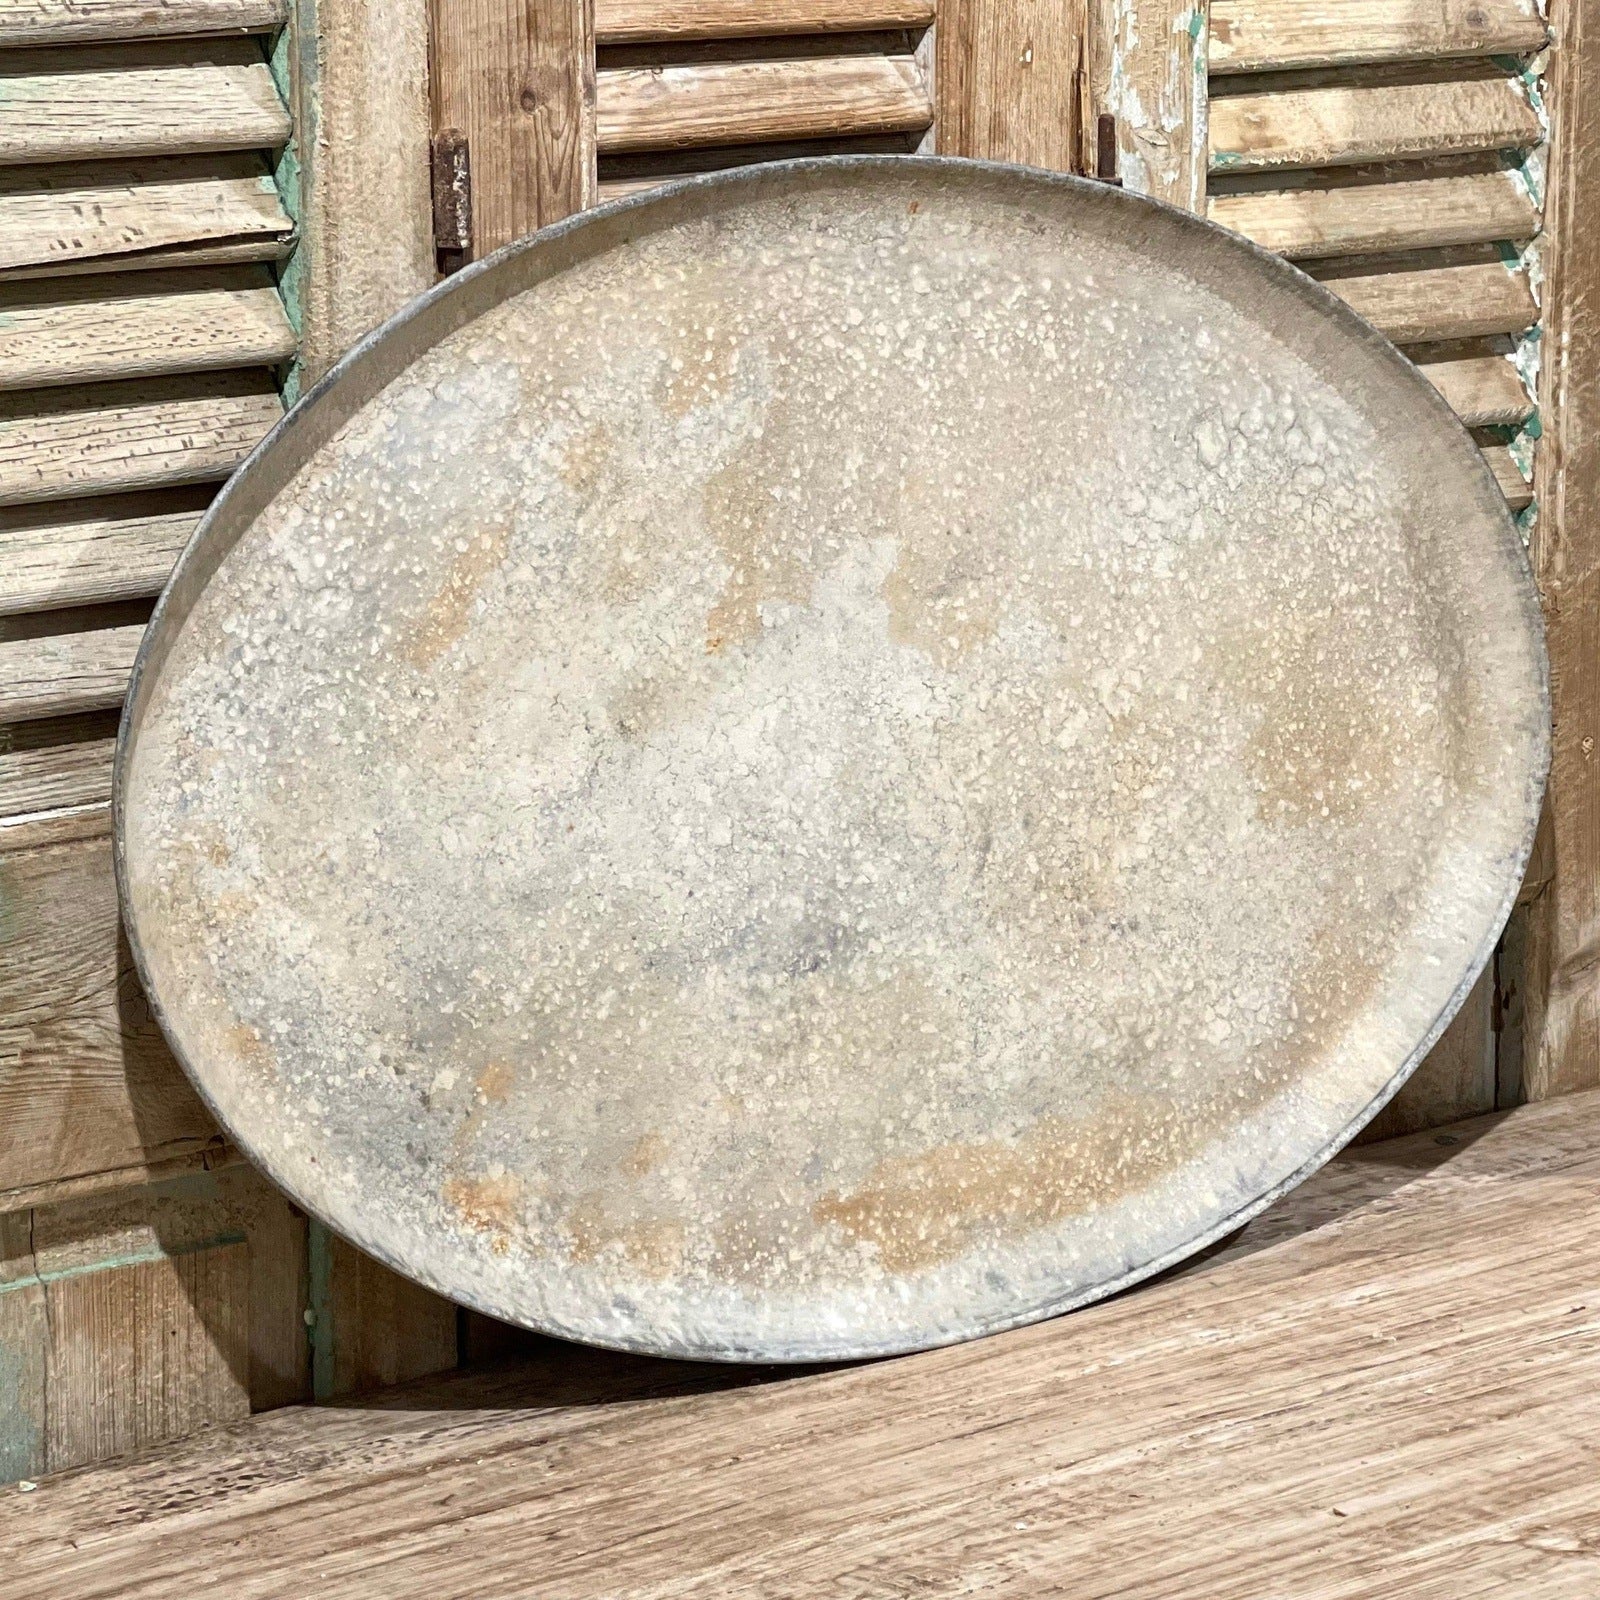 Wooden Decorative Tray Candle Holder: Round Wood Tray Home Decor, Small  Rustic Trays for Coffee Table, Ottoman, Table Centerpieces for Dining Room,  Living Room, Farmhouse Kitchen - Rustic 